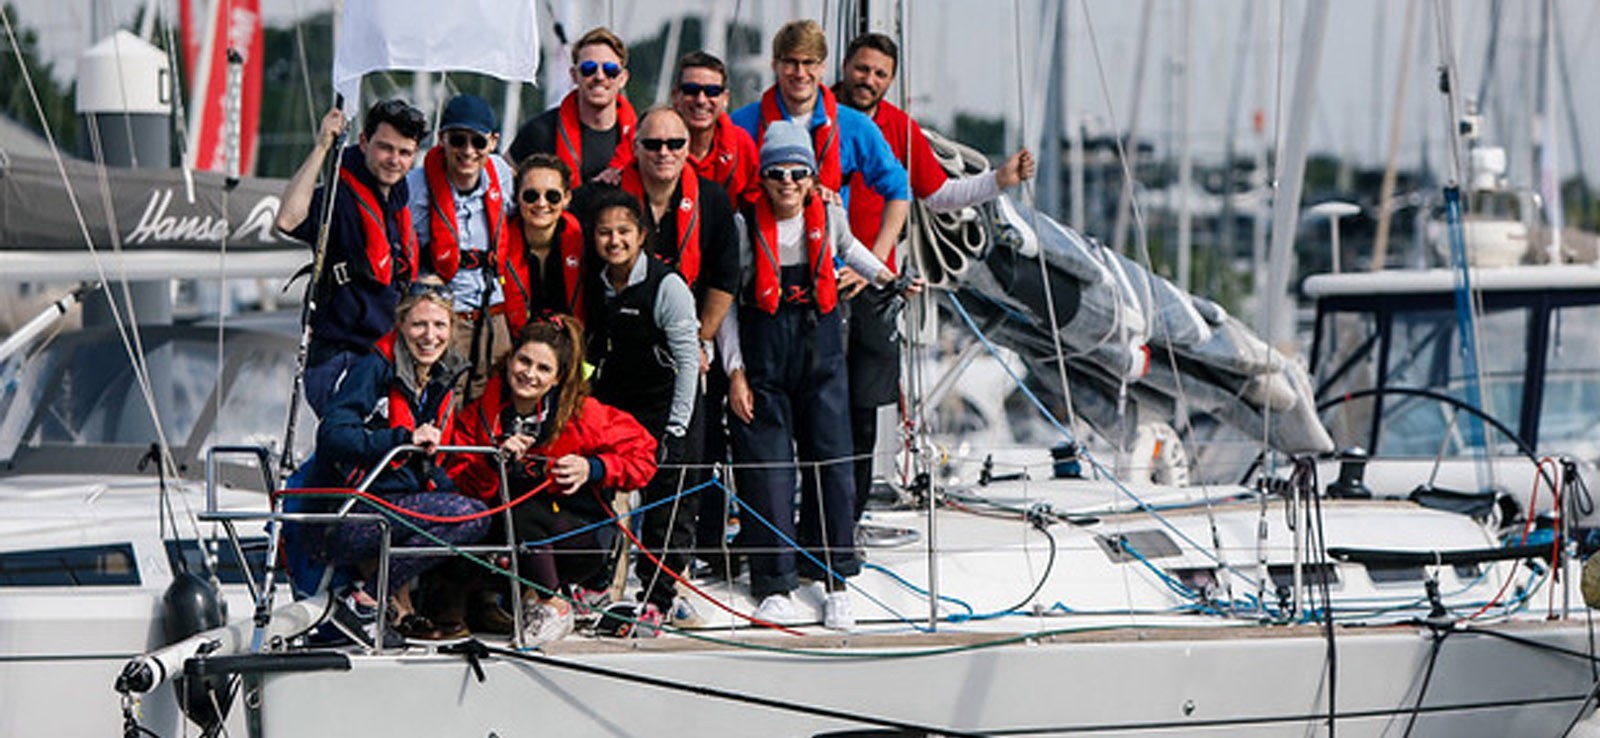 Corporate Sailing Events - The Legal Cup